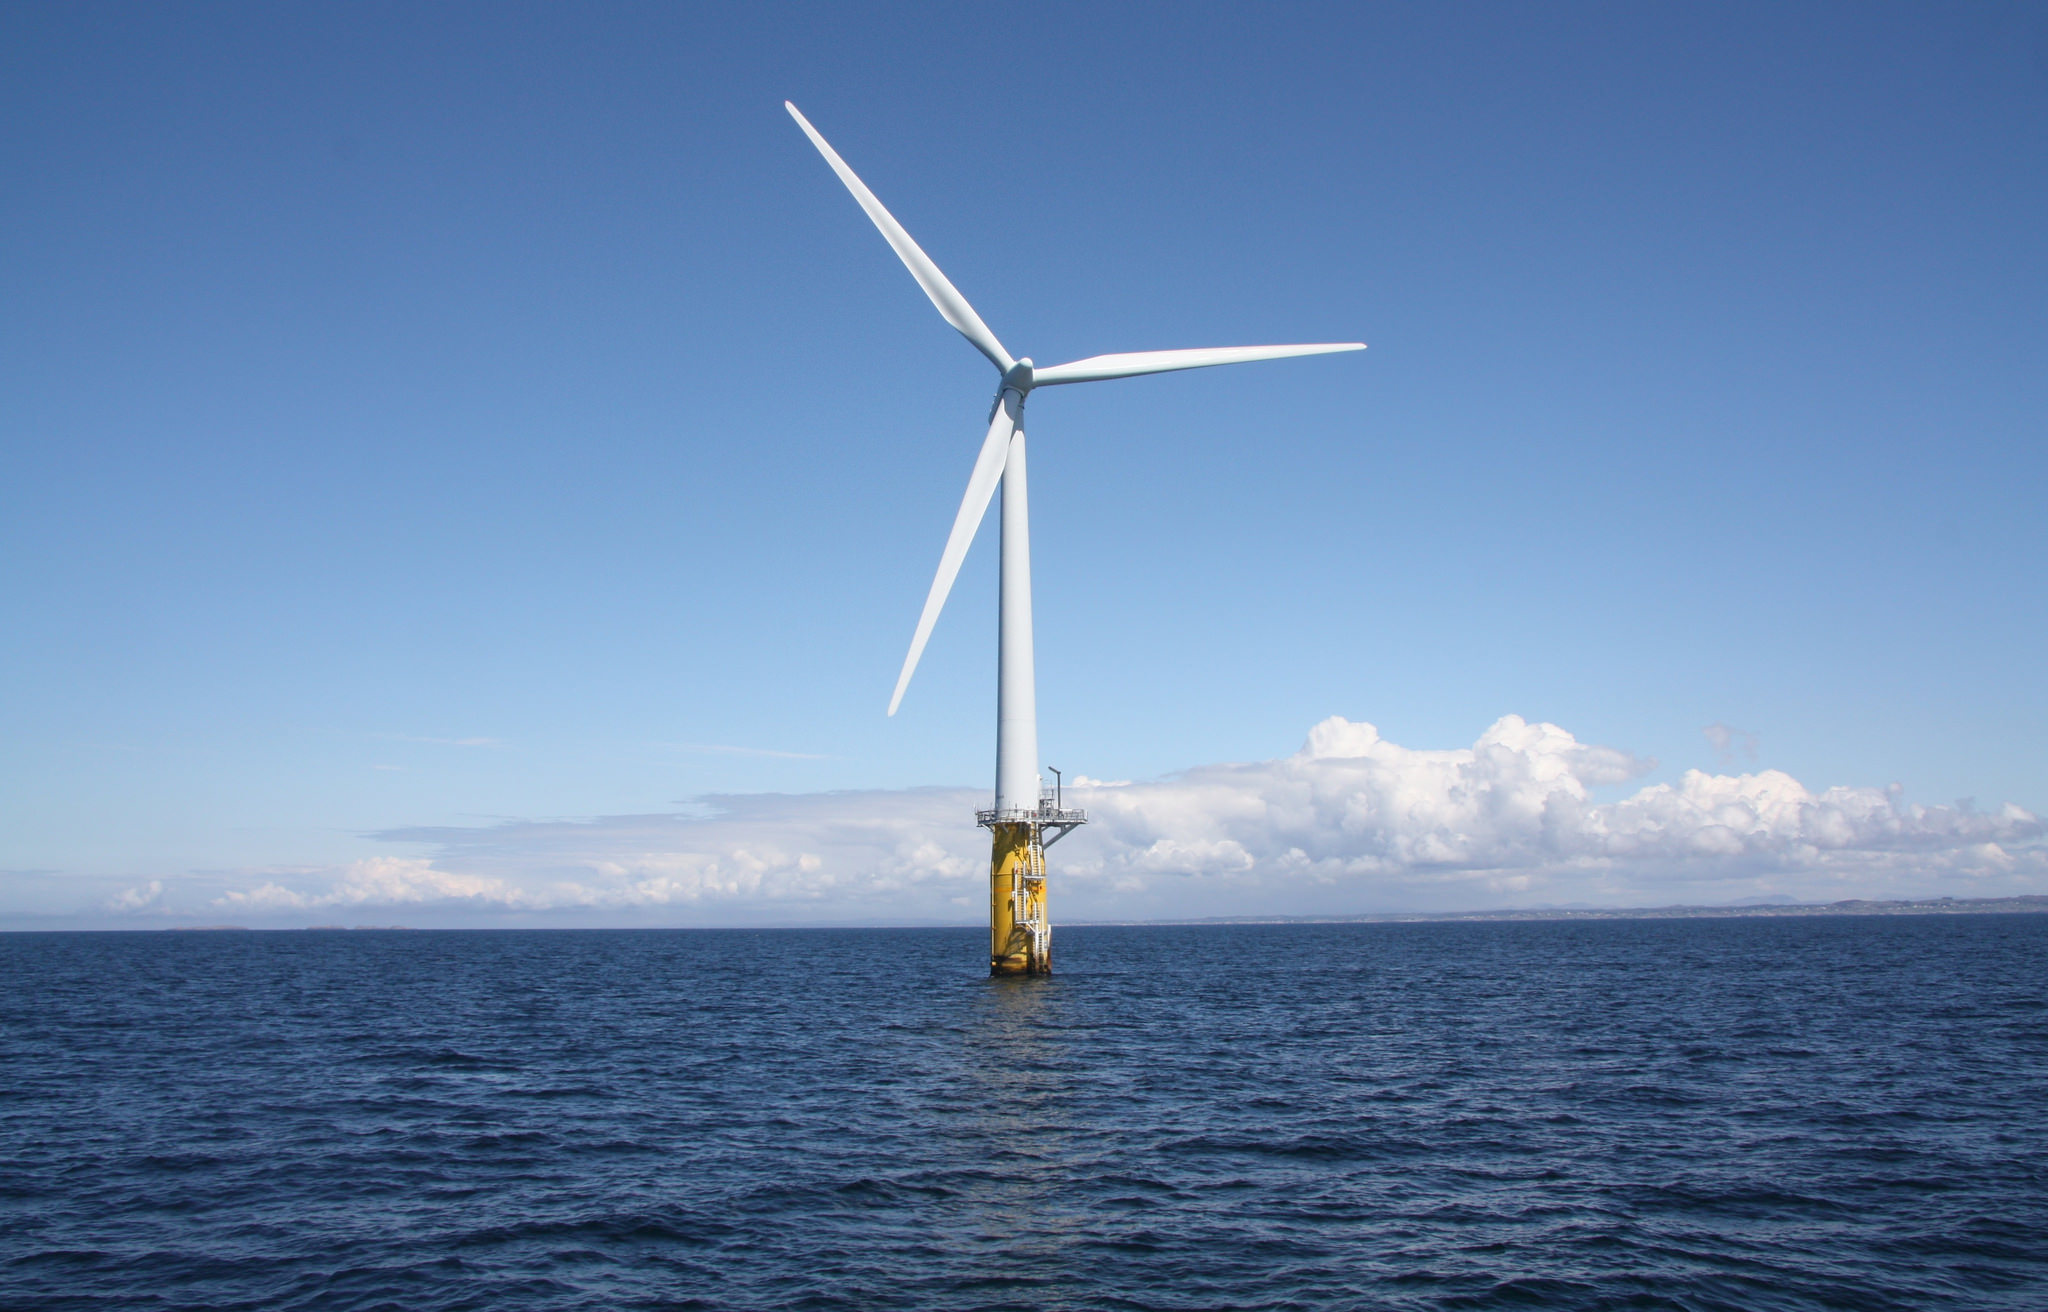 New York to invest $500 million to boost offshore wind power